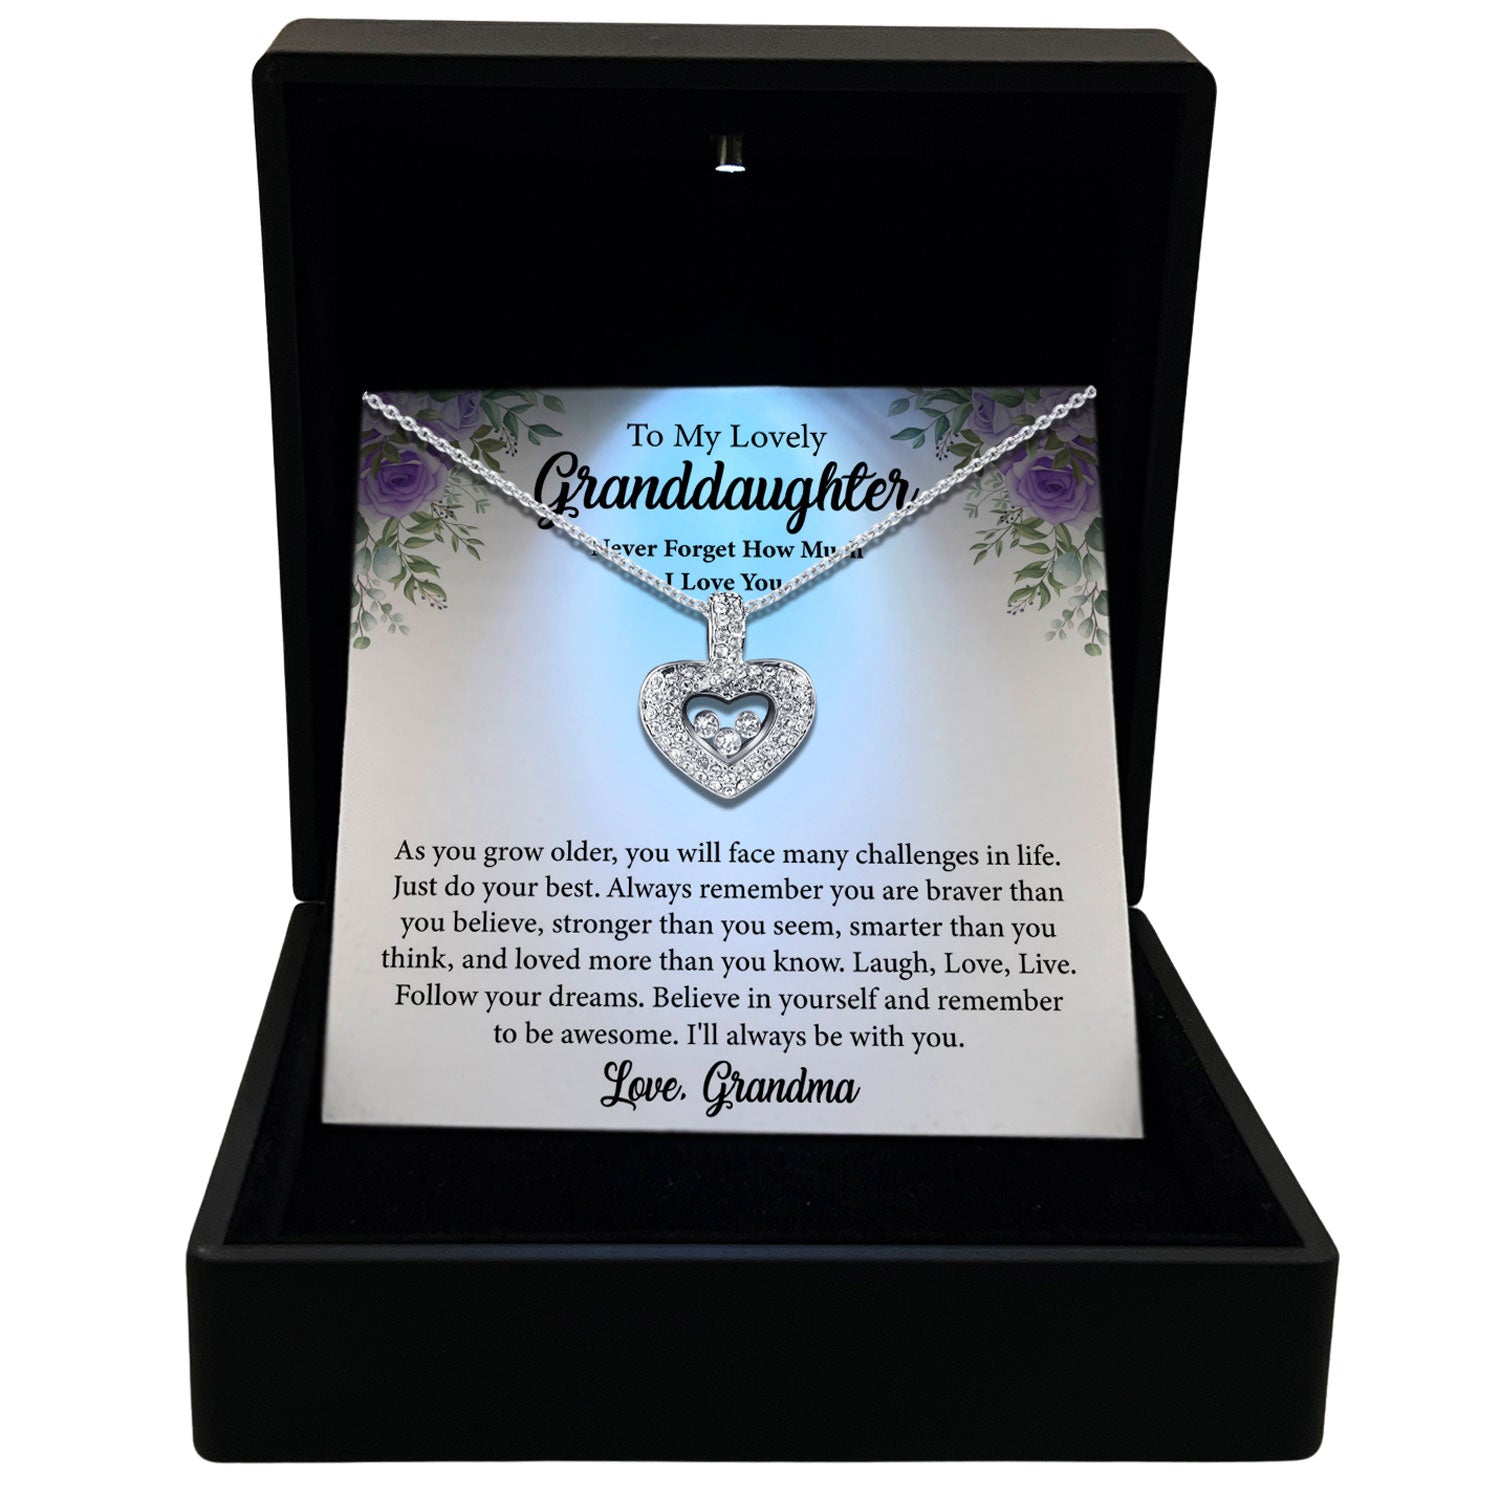 To My Lovely Granddaughter - Never Forget How Much I Love You - Tryndi Floating Heart Necklace